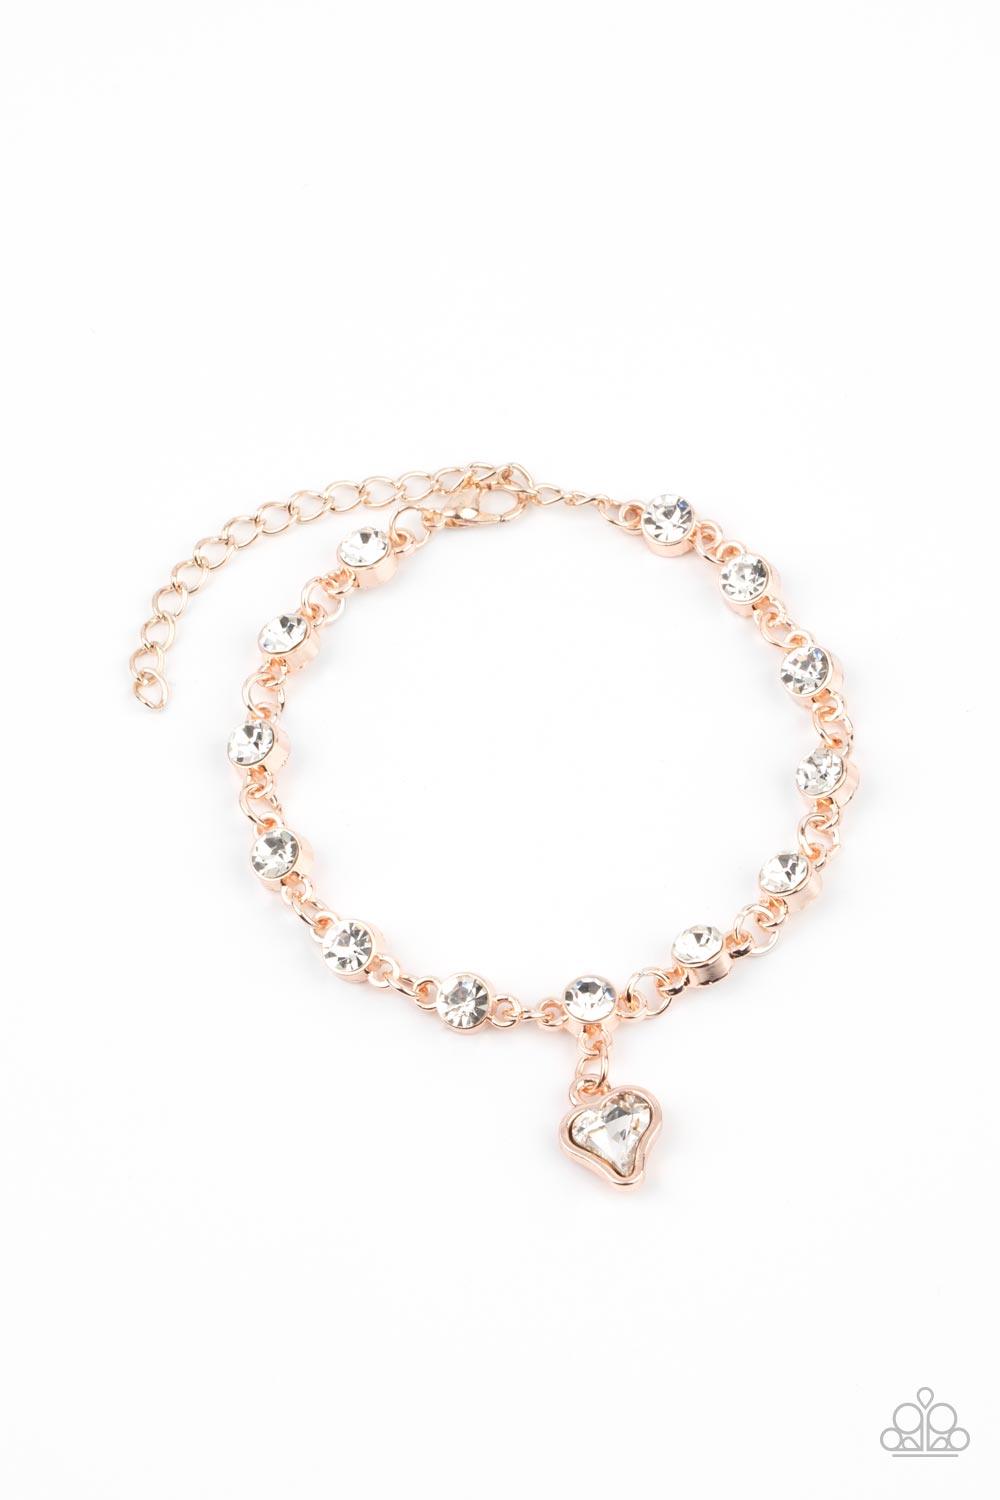 Paparazzi Accessories Sweet Sixteen - Rose Gold Brilliant white rhinestones in rose gold settings are linked together and accented with a charming white rhinestone heart that dangles sweetly from the wrist. Features an adjustable clasp closure. Sold as on